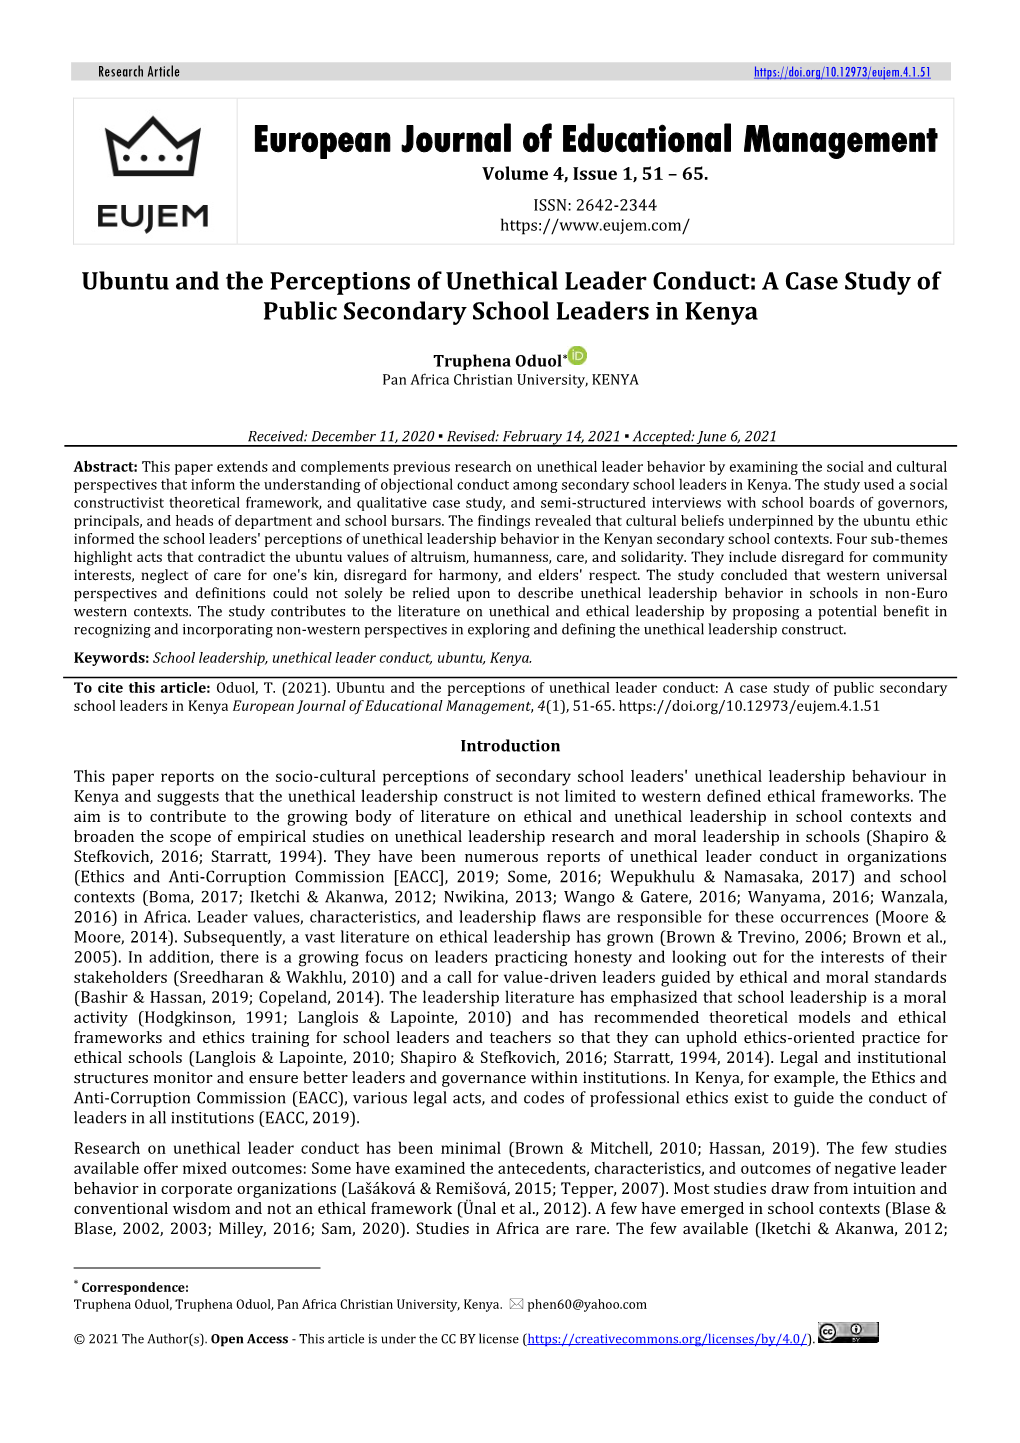 Ubuntu and the Perceptions of Unethical Leader Conduct: a Case Study of Public Secondary School Leaders in Kenya